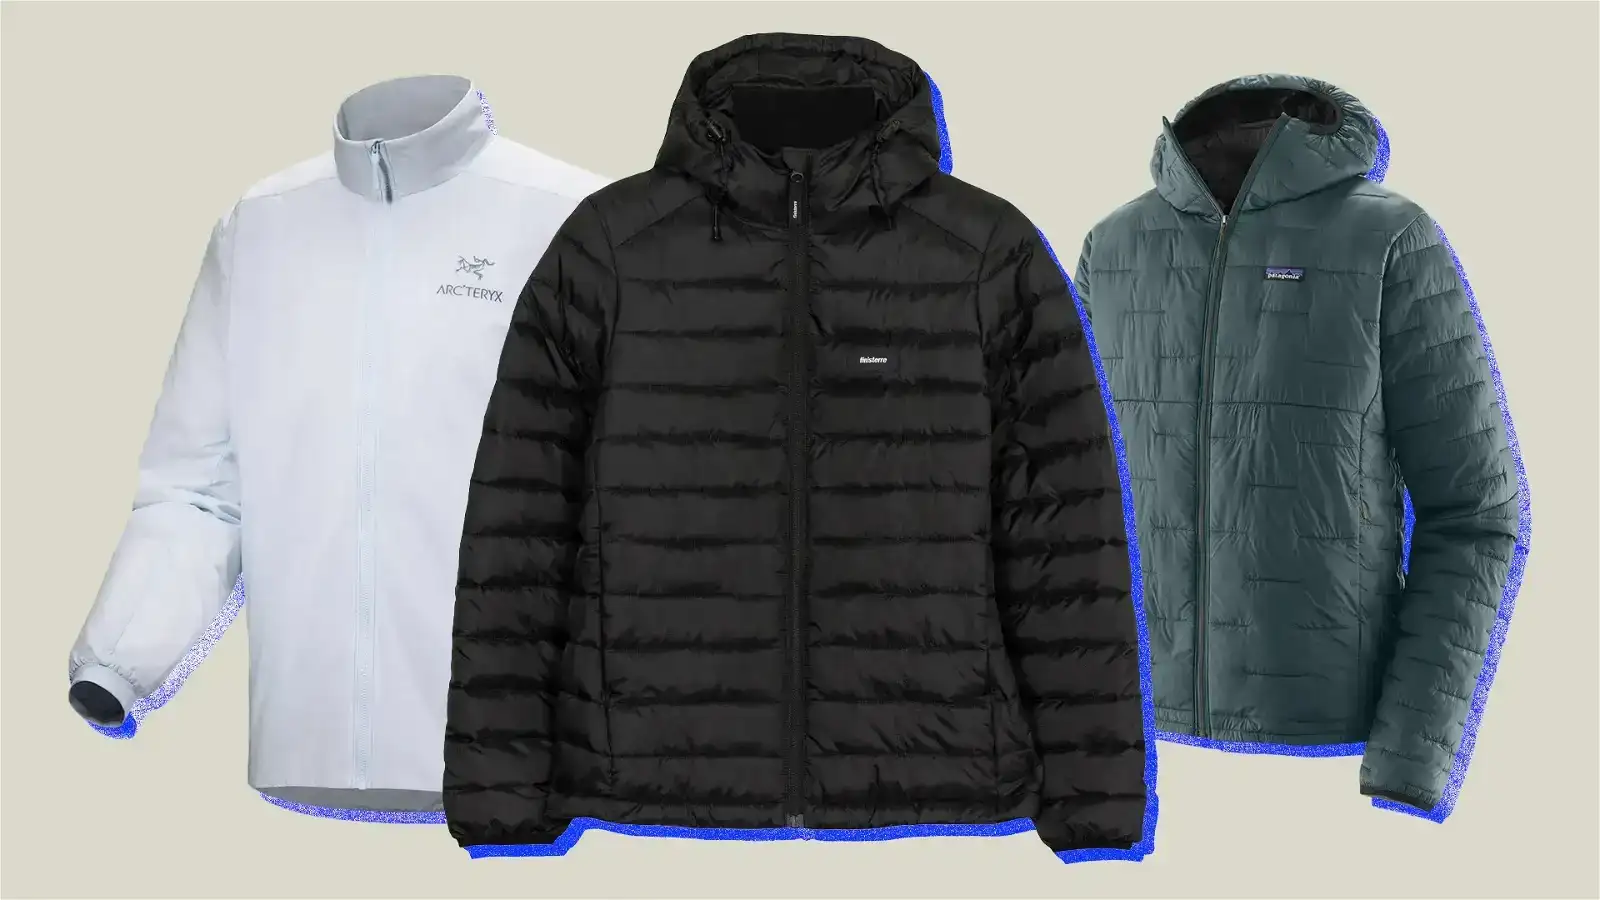 The Best Synthetic Down Jackets for Staying Warm Without Feathers